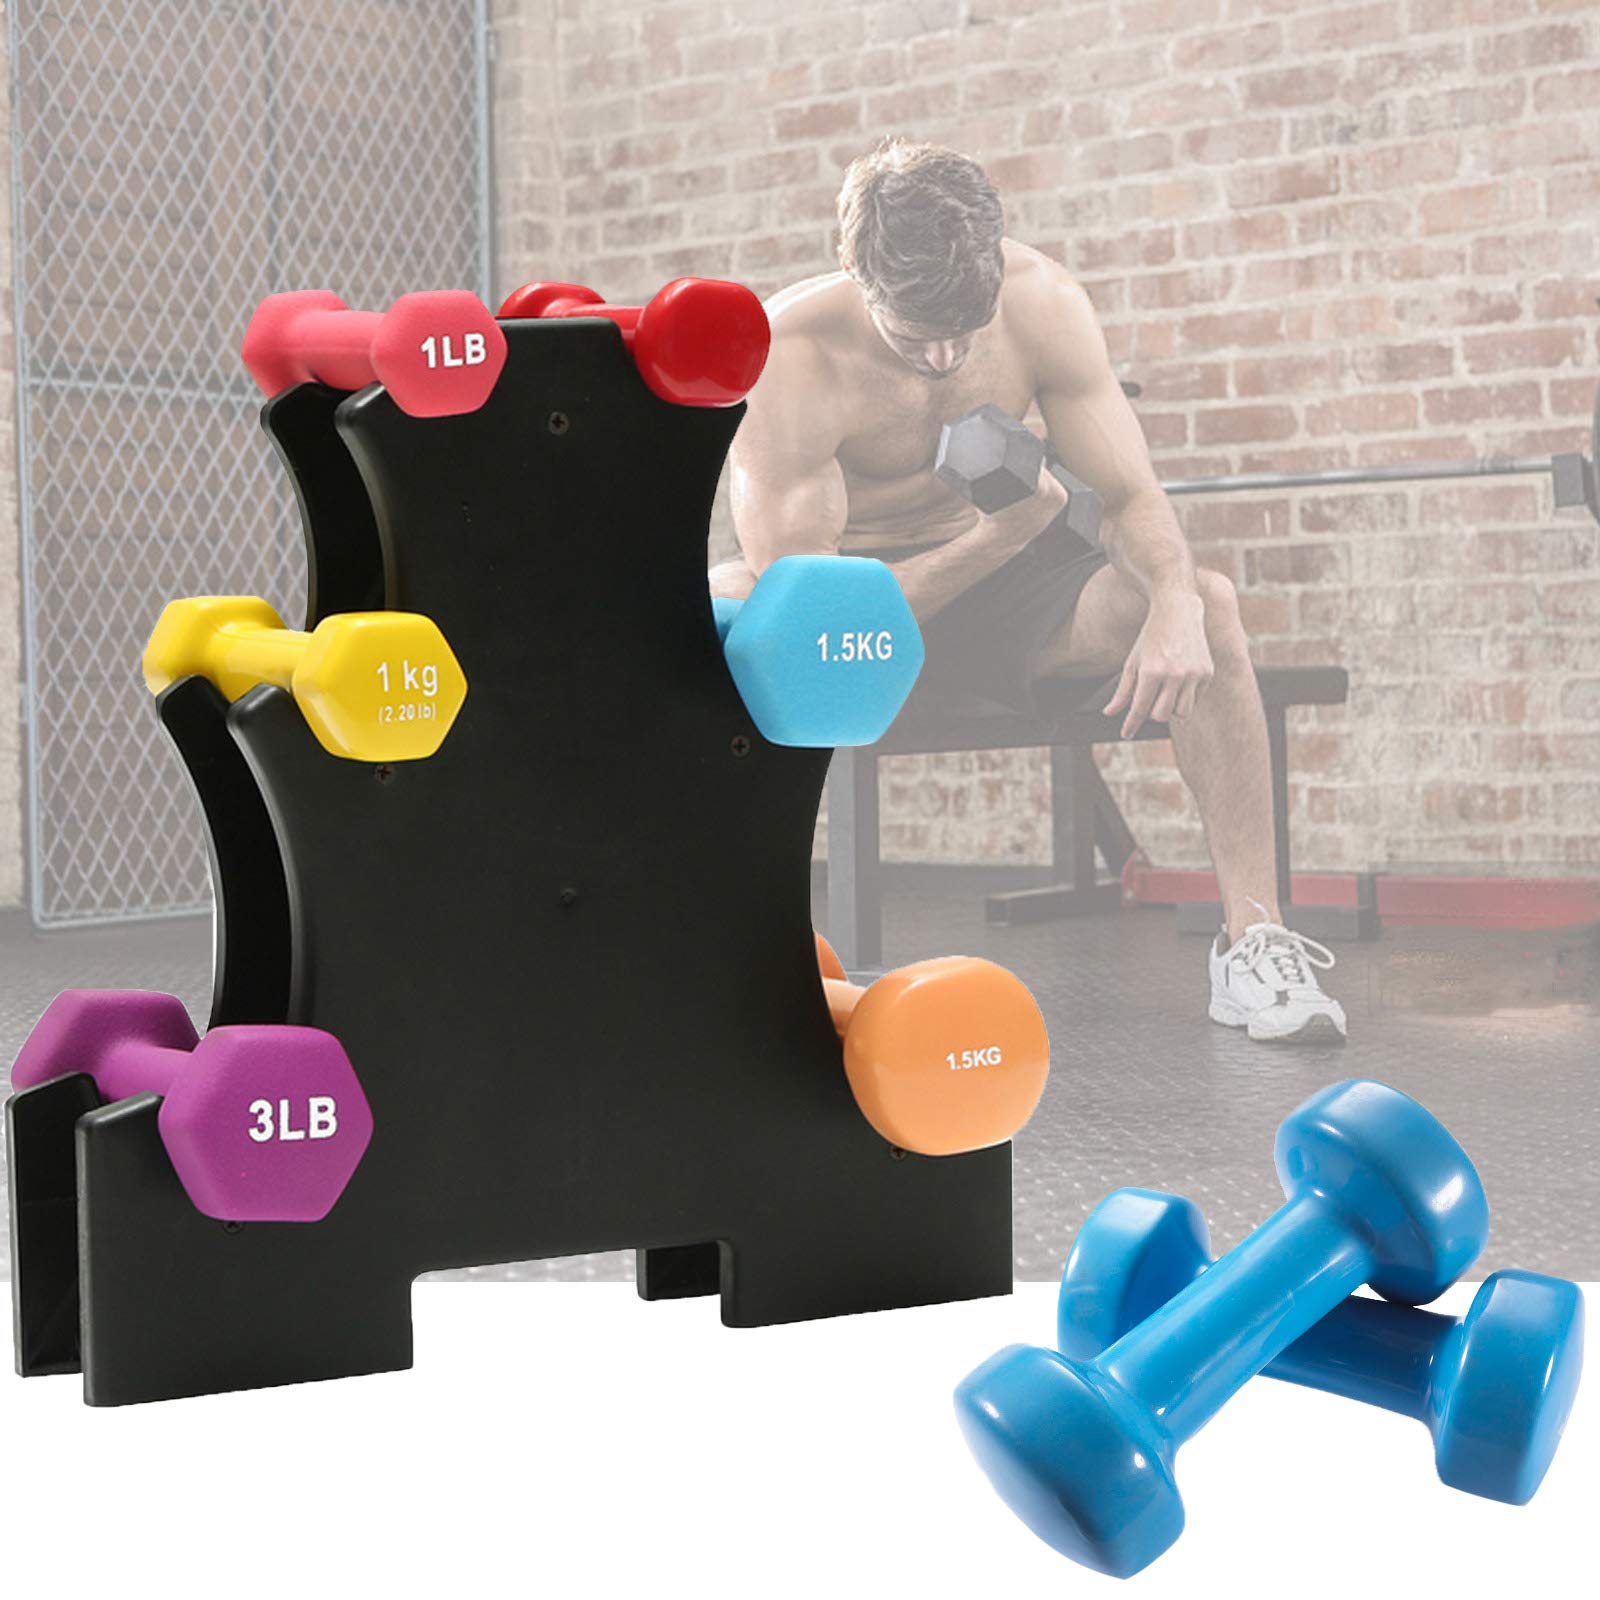 Dumbbell Rack Weight Tree Rack , 3 Tier Dumbbell Set with Rack Dumbbell Rack Stand Hand Weight Rack Household Dumbbell Tree Rack Dumbbell Bracket Free Weight Stand - image 1 of 7